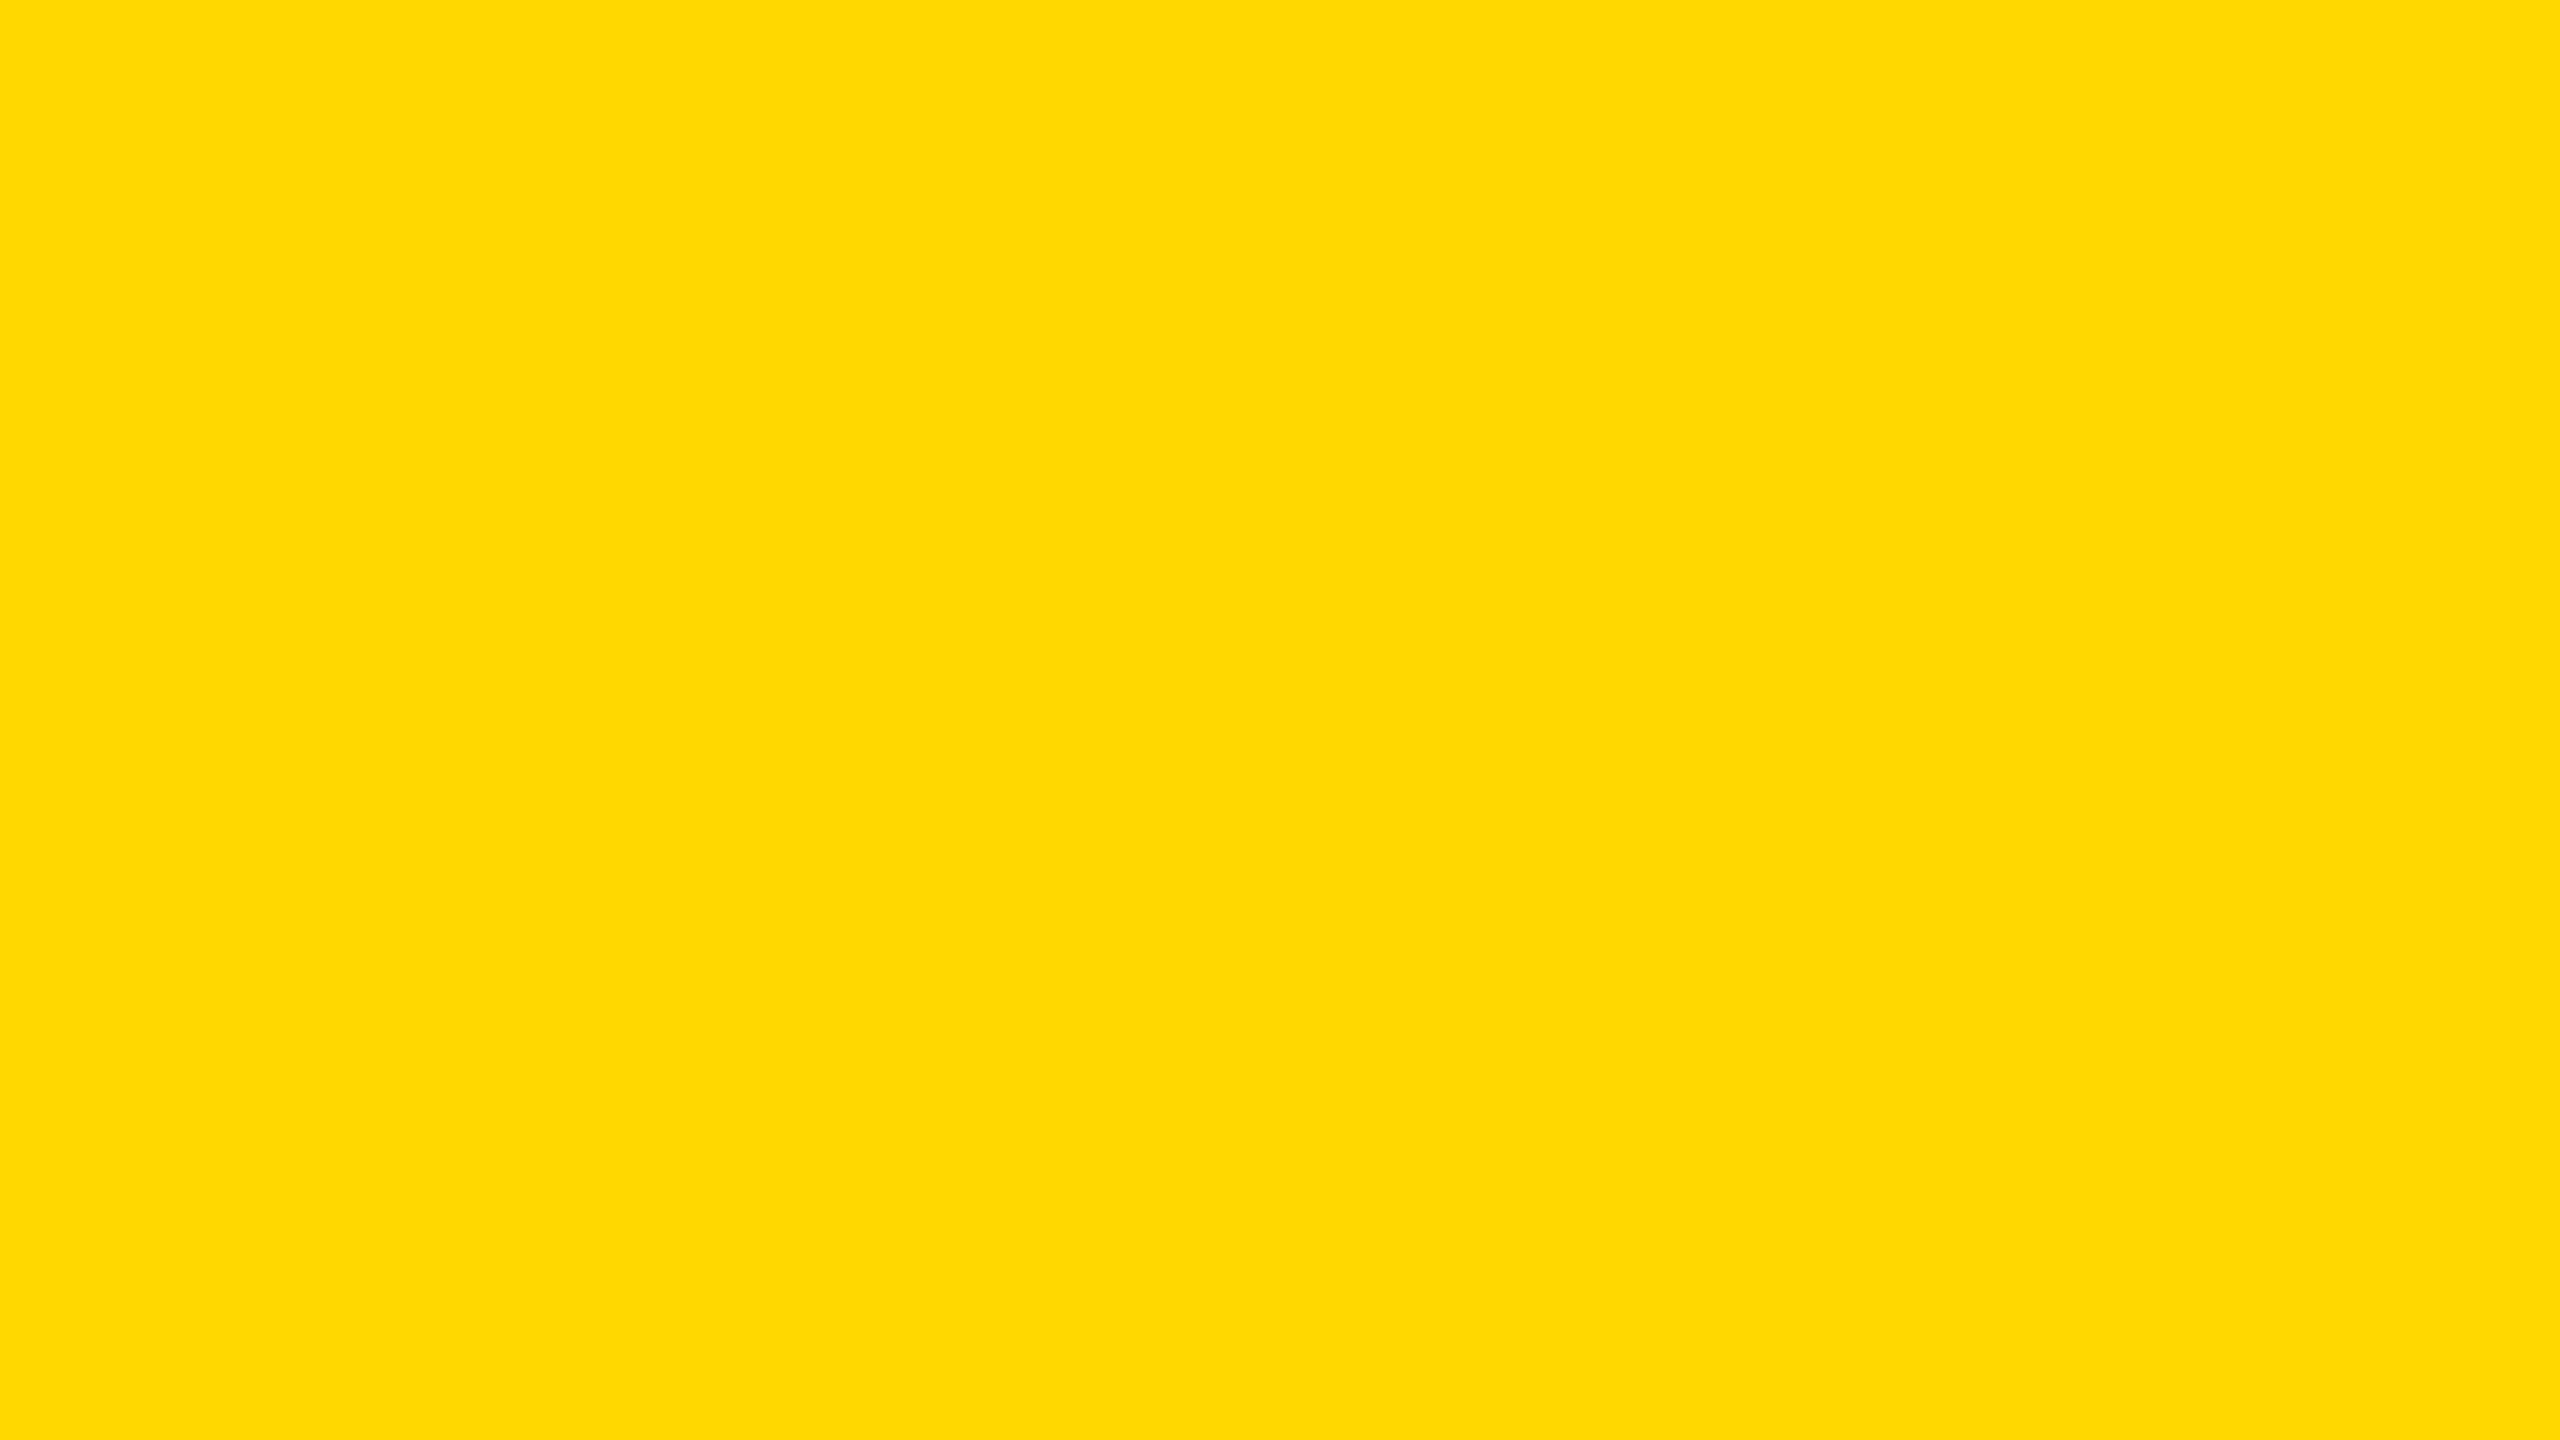 Background Color Solid School Yellow Background Image